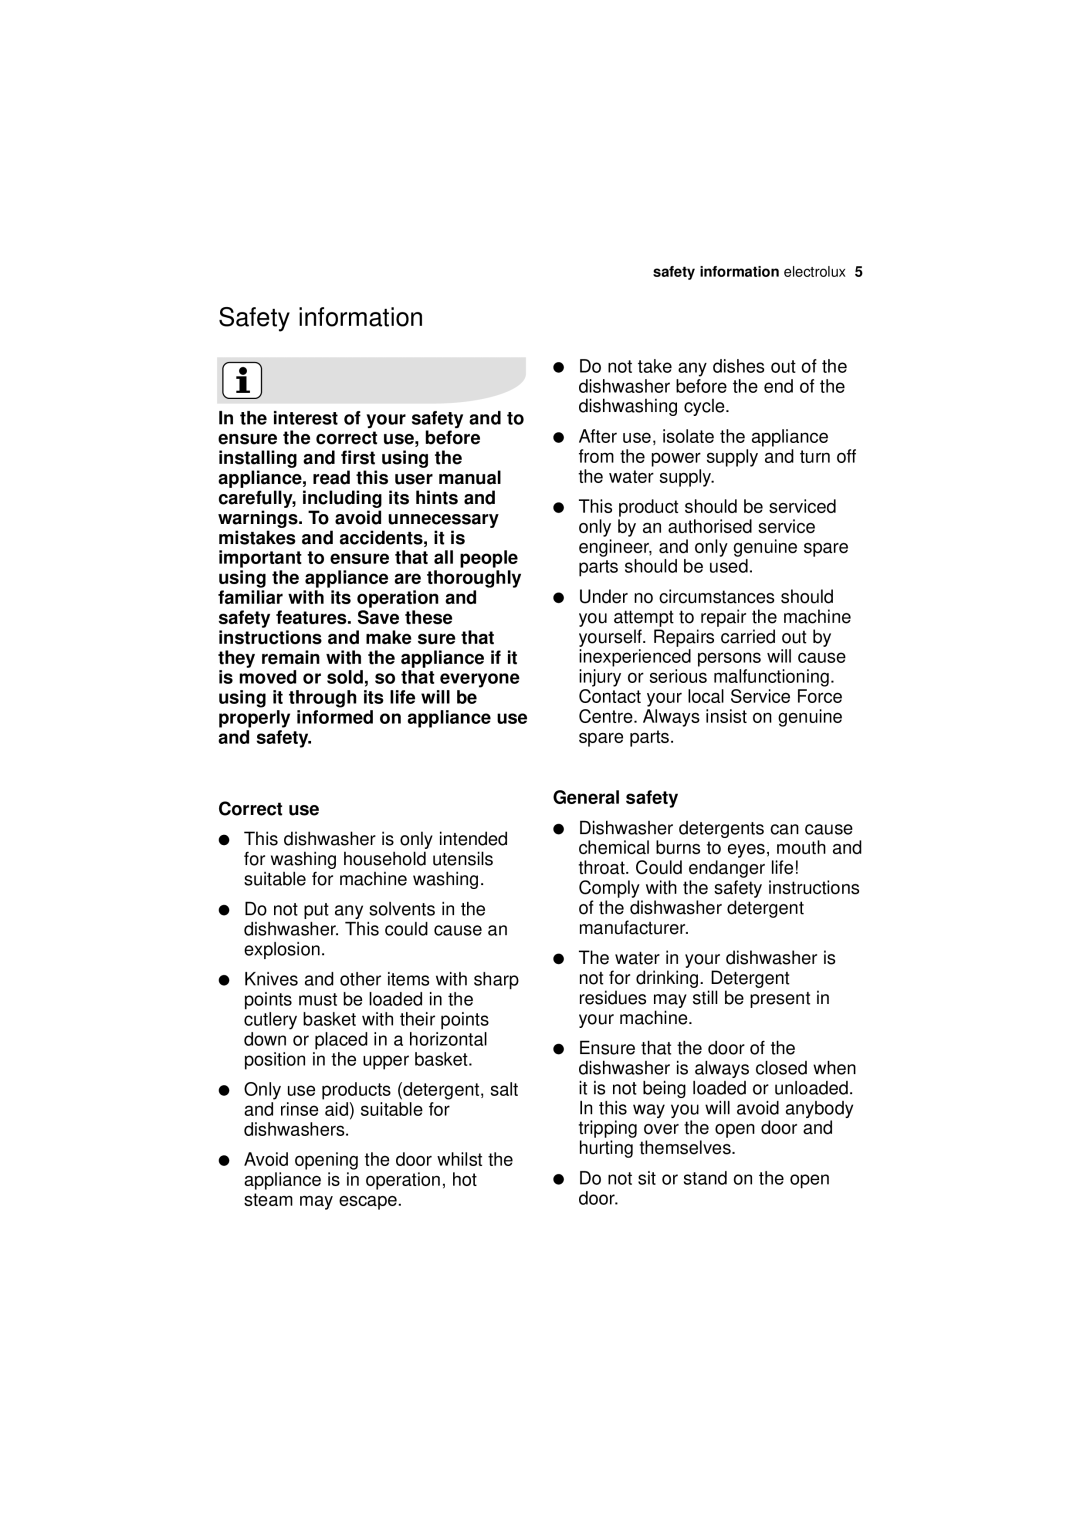 Electrolux ESI 63010 user manual Safety information, Correct use, General safety 